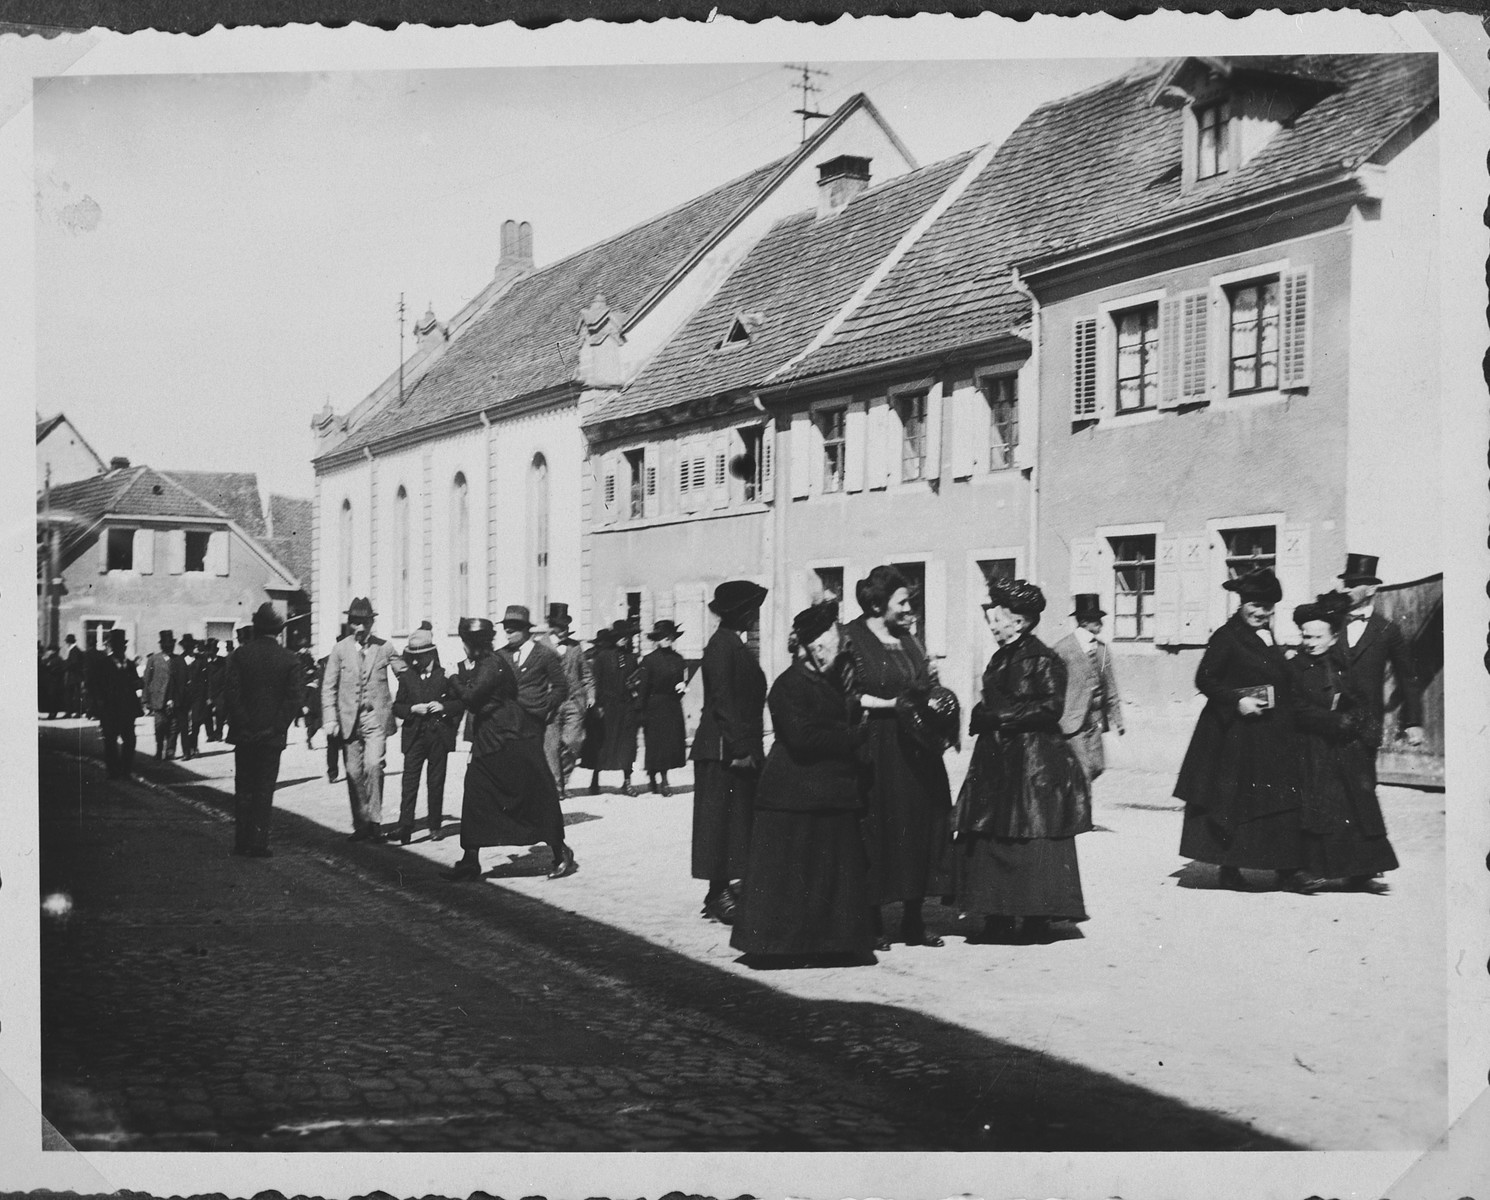 German Jews congregate on the street outside the synagogue in Breisach after Saturday morning services.

Rosa Geismar (nee Uffenheimer) is third from the right.